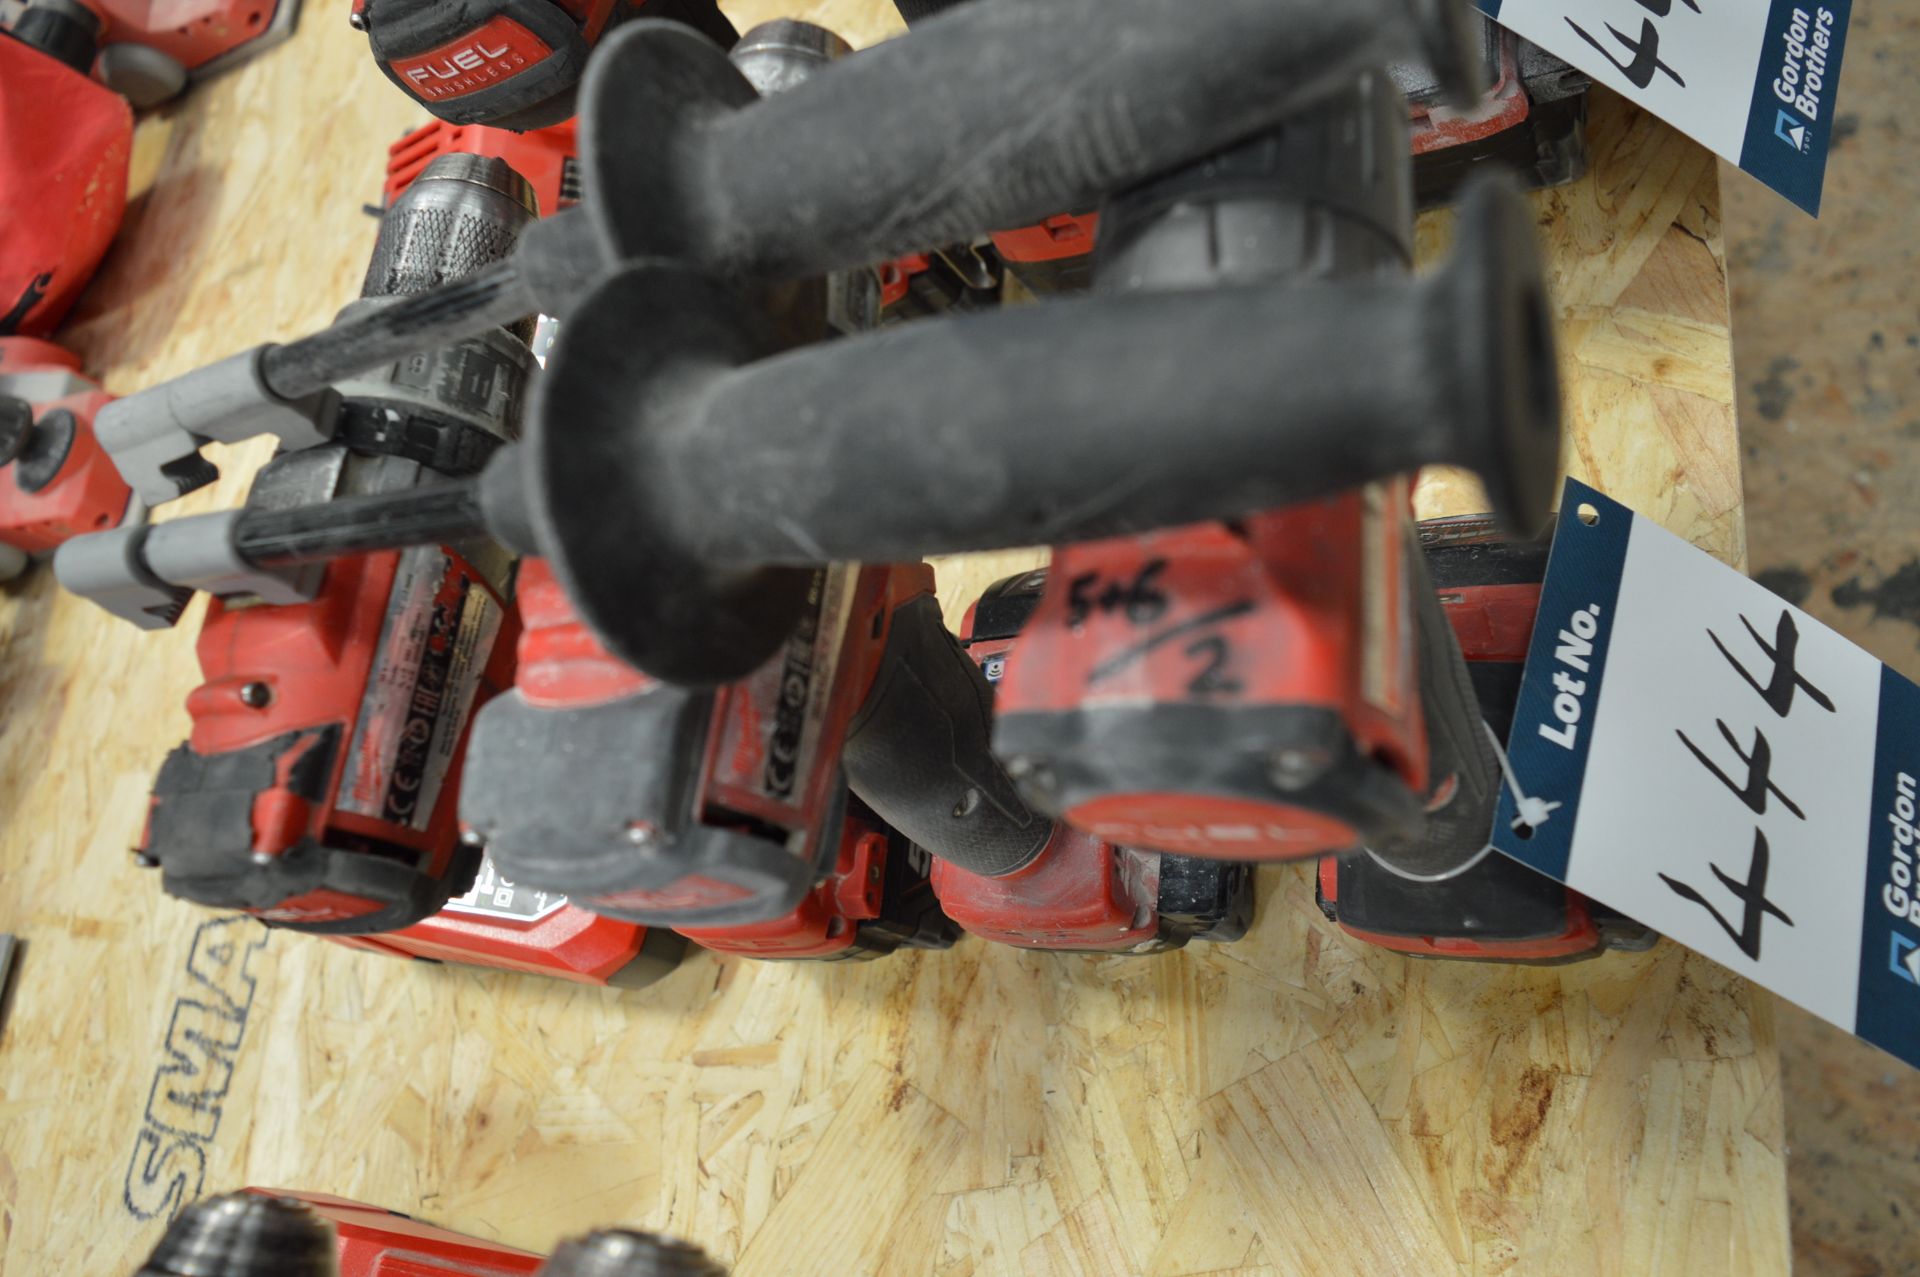 3x (no.) various Milwaukee, 18v drills each with battery and one charger